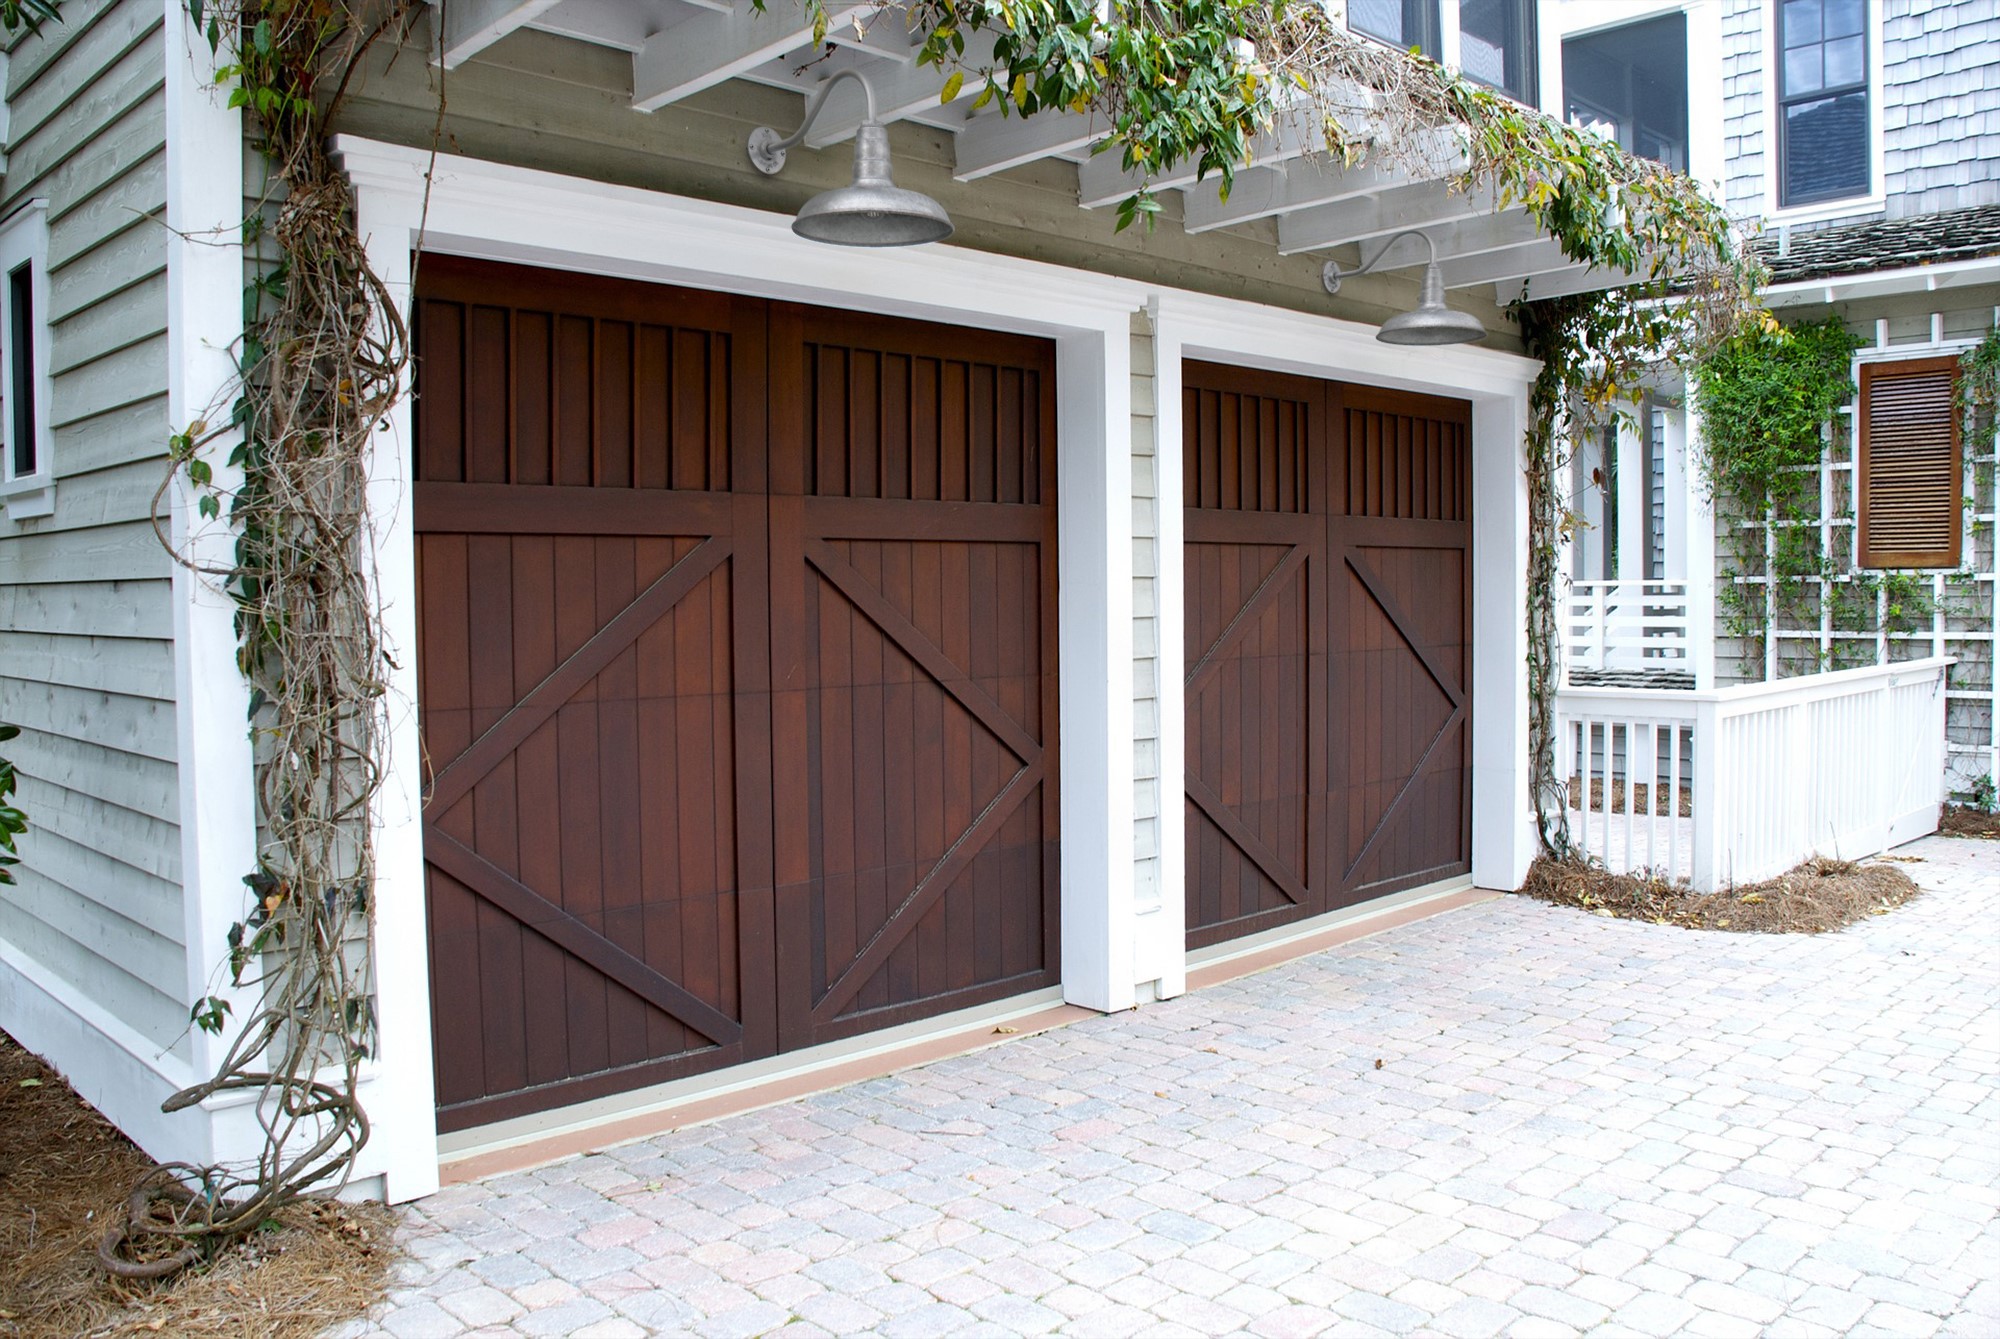 The Topanga Galvanized Lights for a double car garage